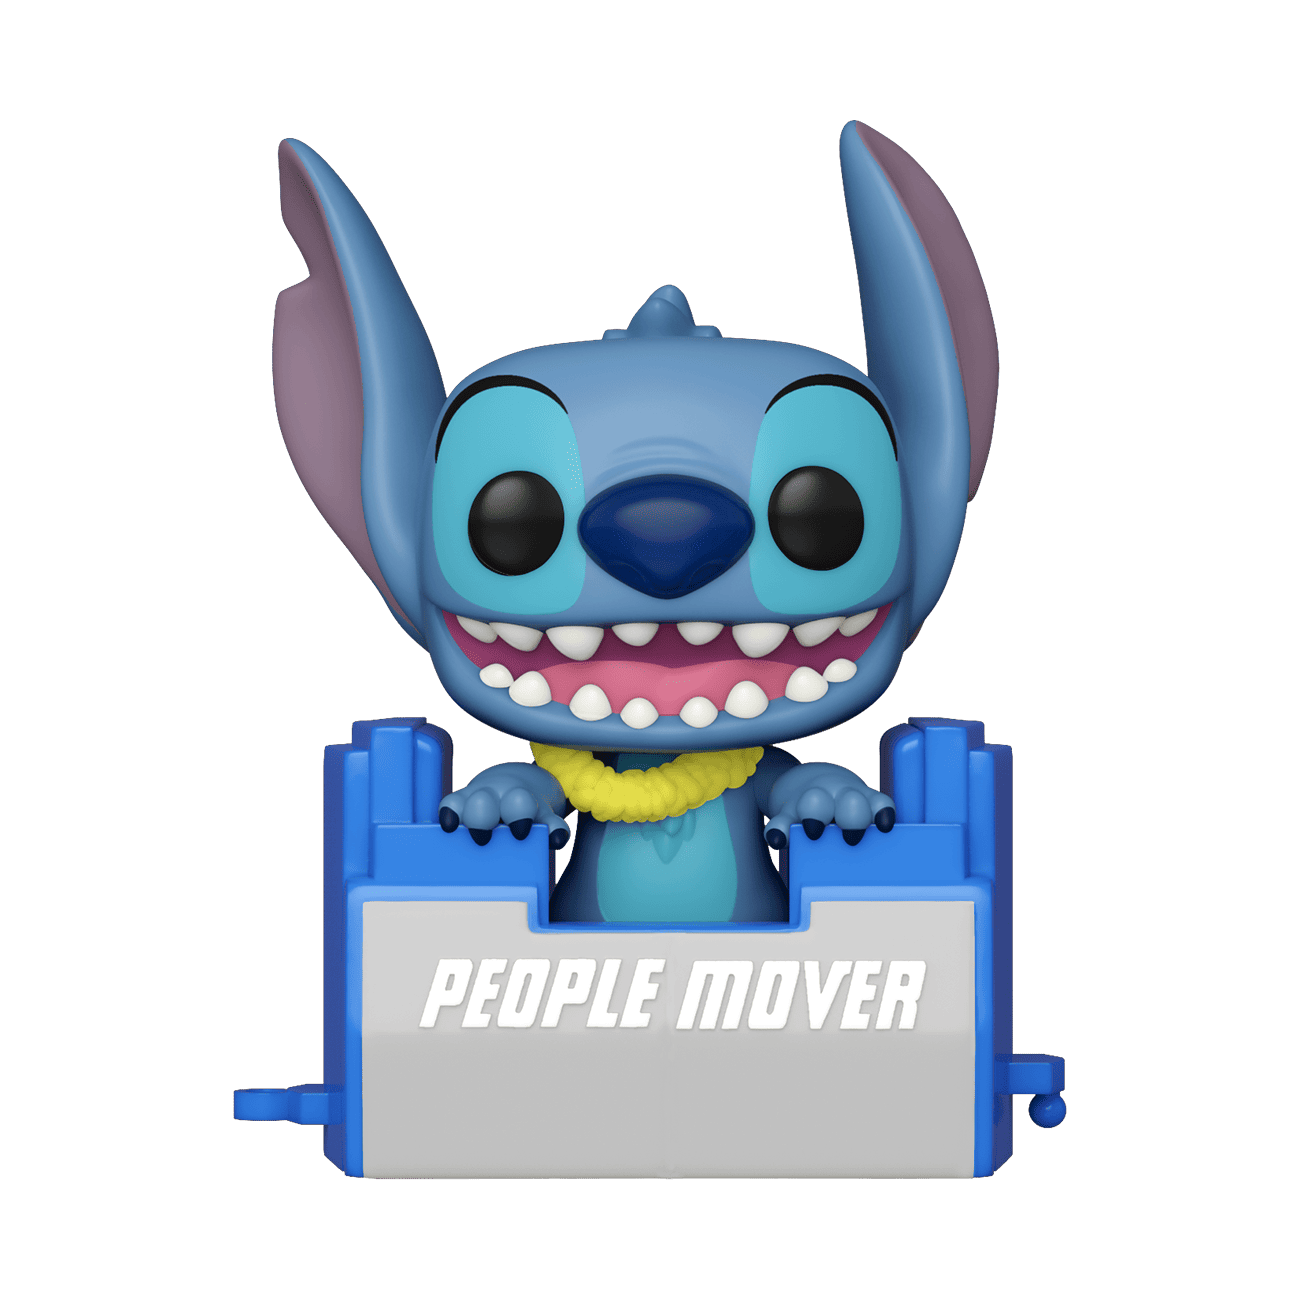 Buy Pop! Stitch on the Peoplemover at Funko.